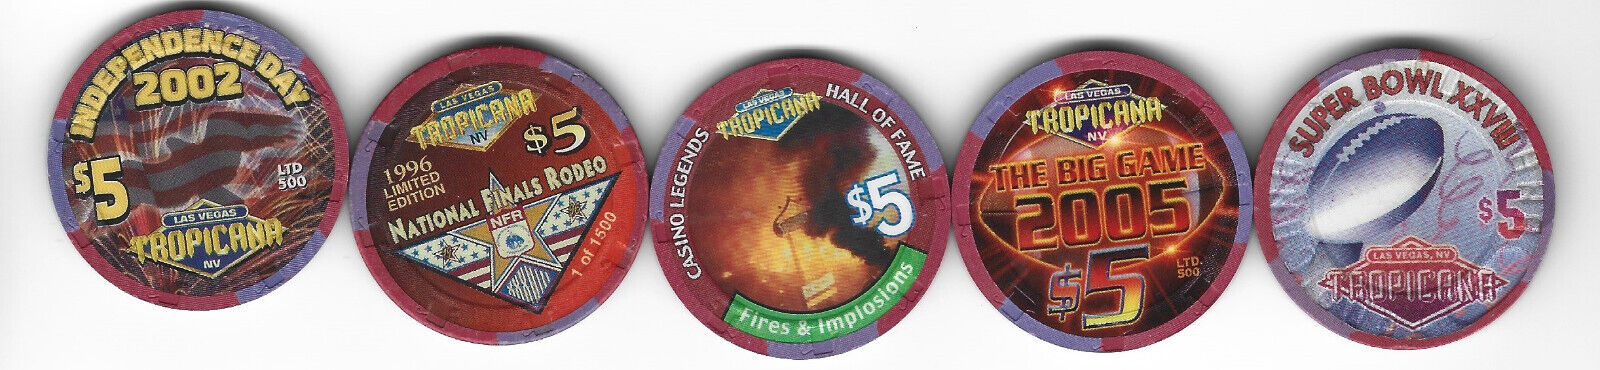 FIVE $5 CASINO CHIPS FROM THE TROPICANA CASINO LAS VEGAS, NV-NOW CLOSED